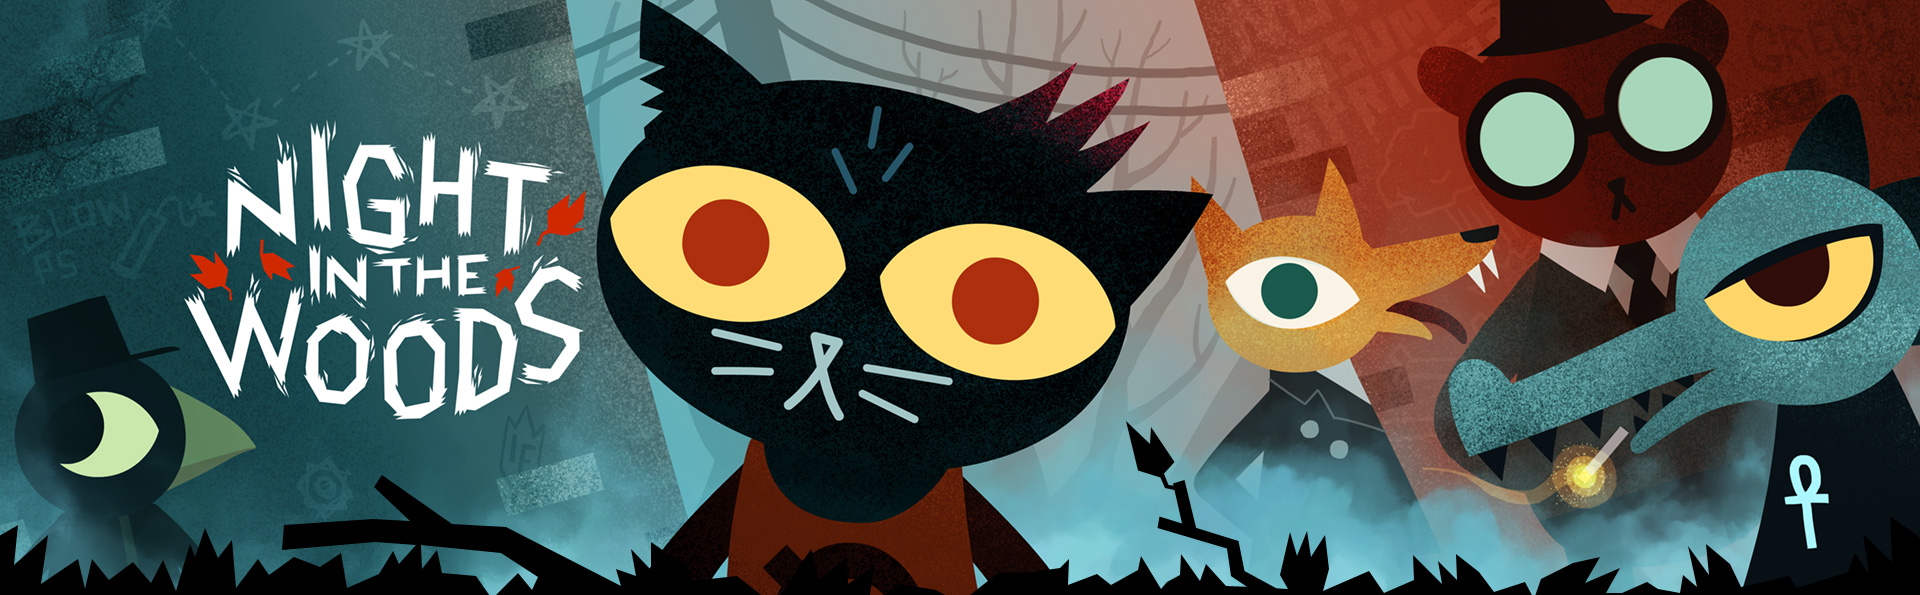 night in the woods download mac